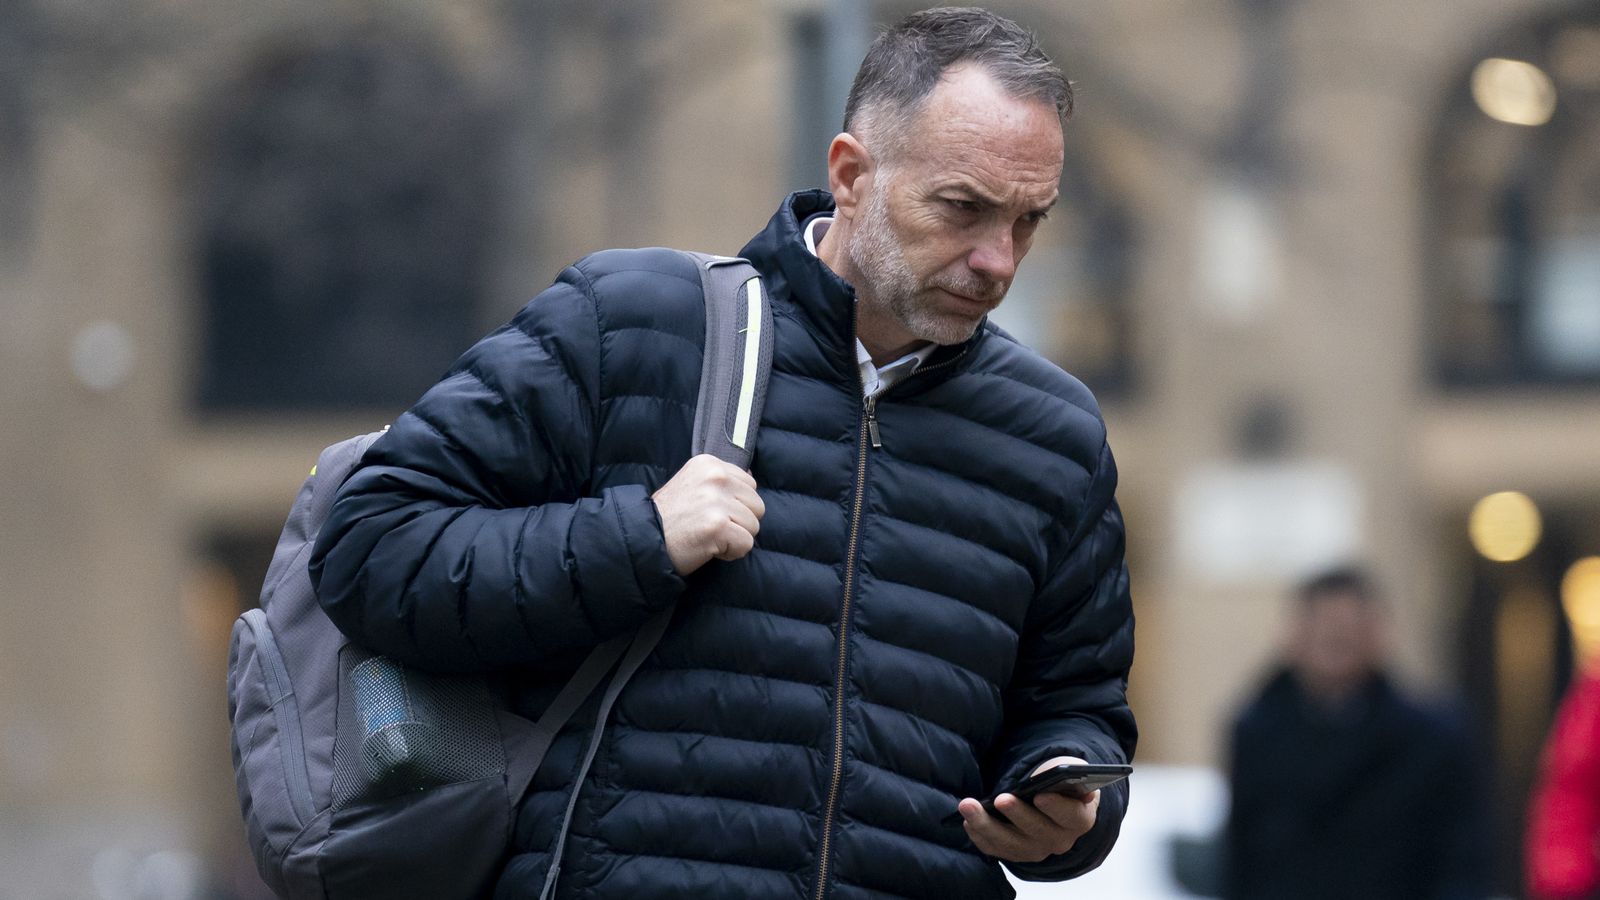 'Sheriff of Soho': Sacked Met officer Frank Partridge found guilty of taking bribes 